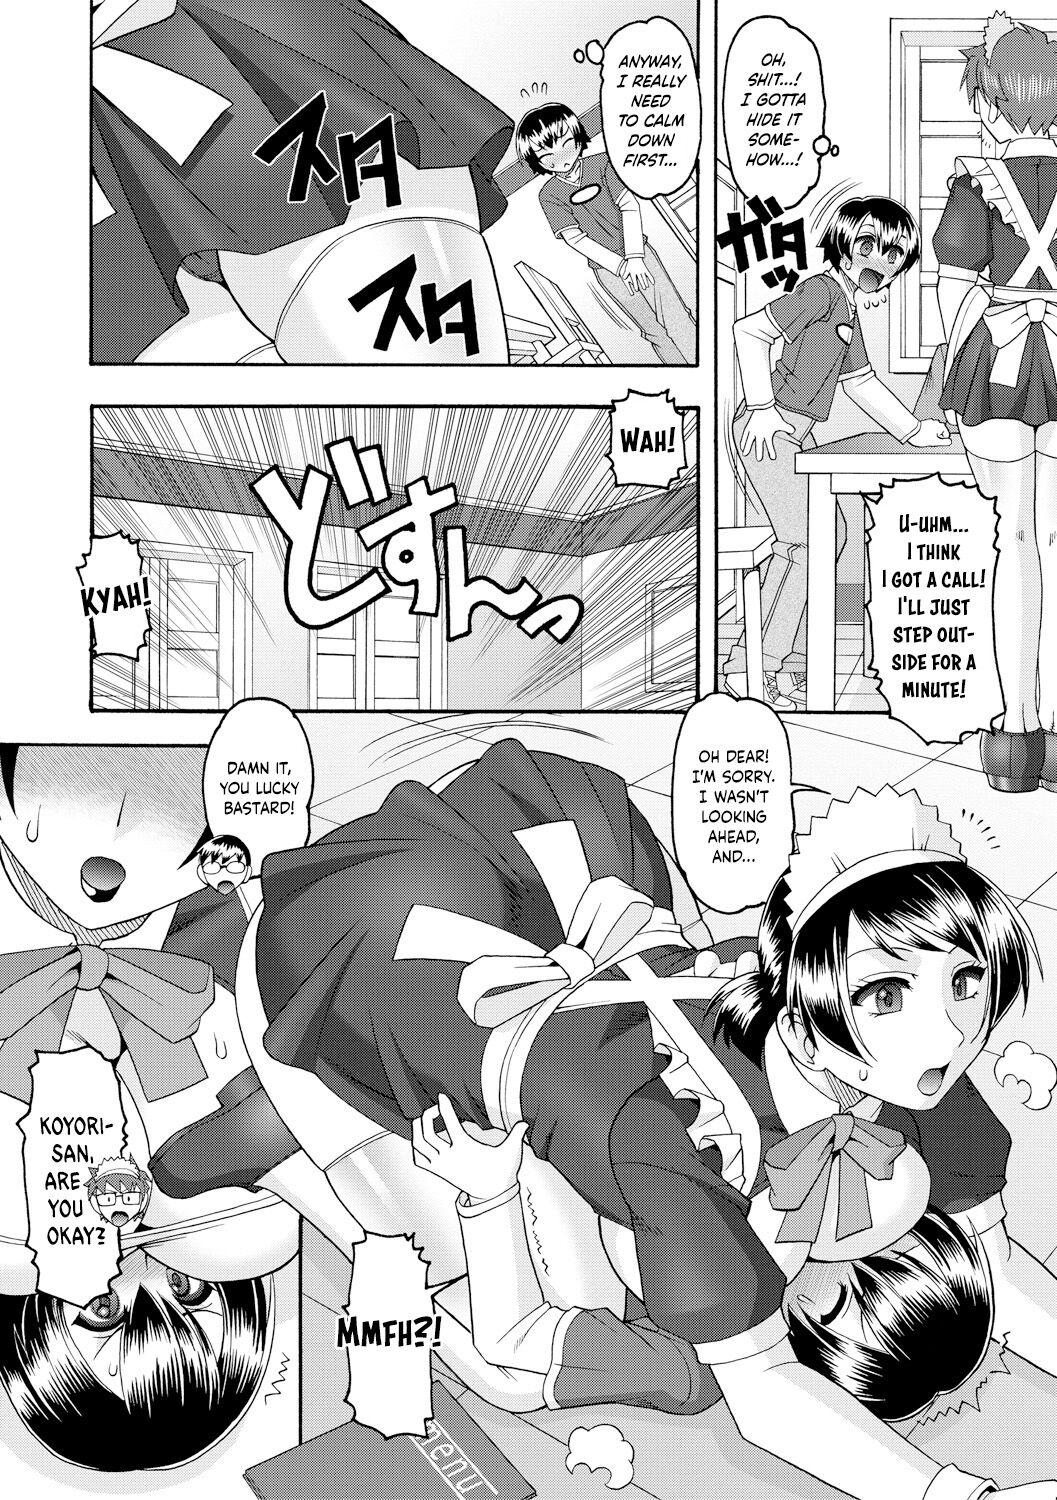 Maid OVER 30 Chapters 1-6 3